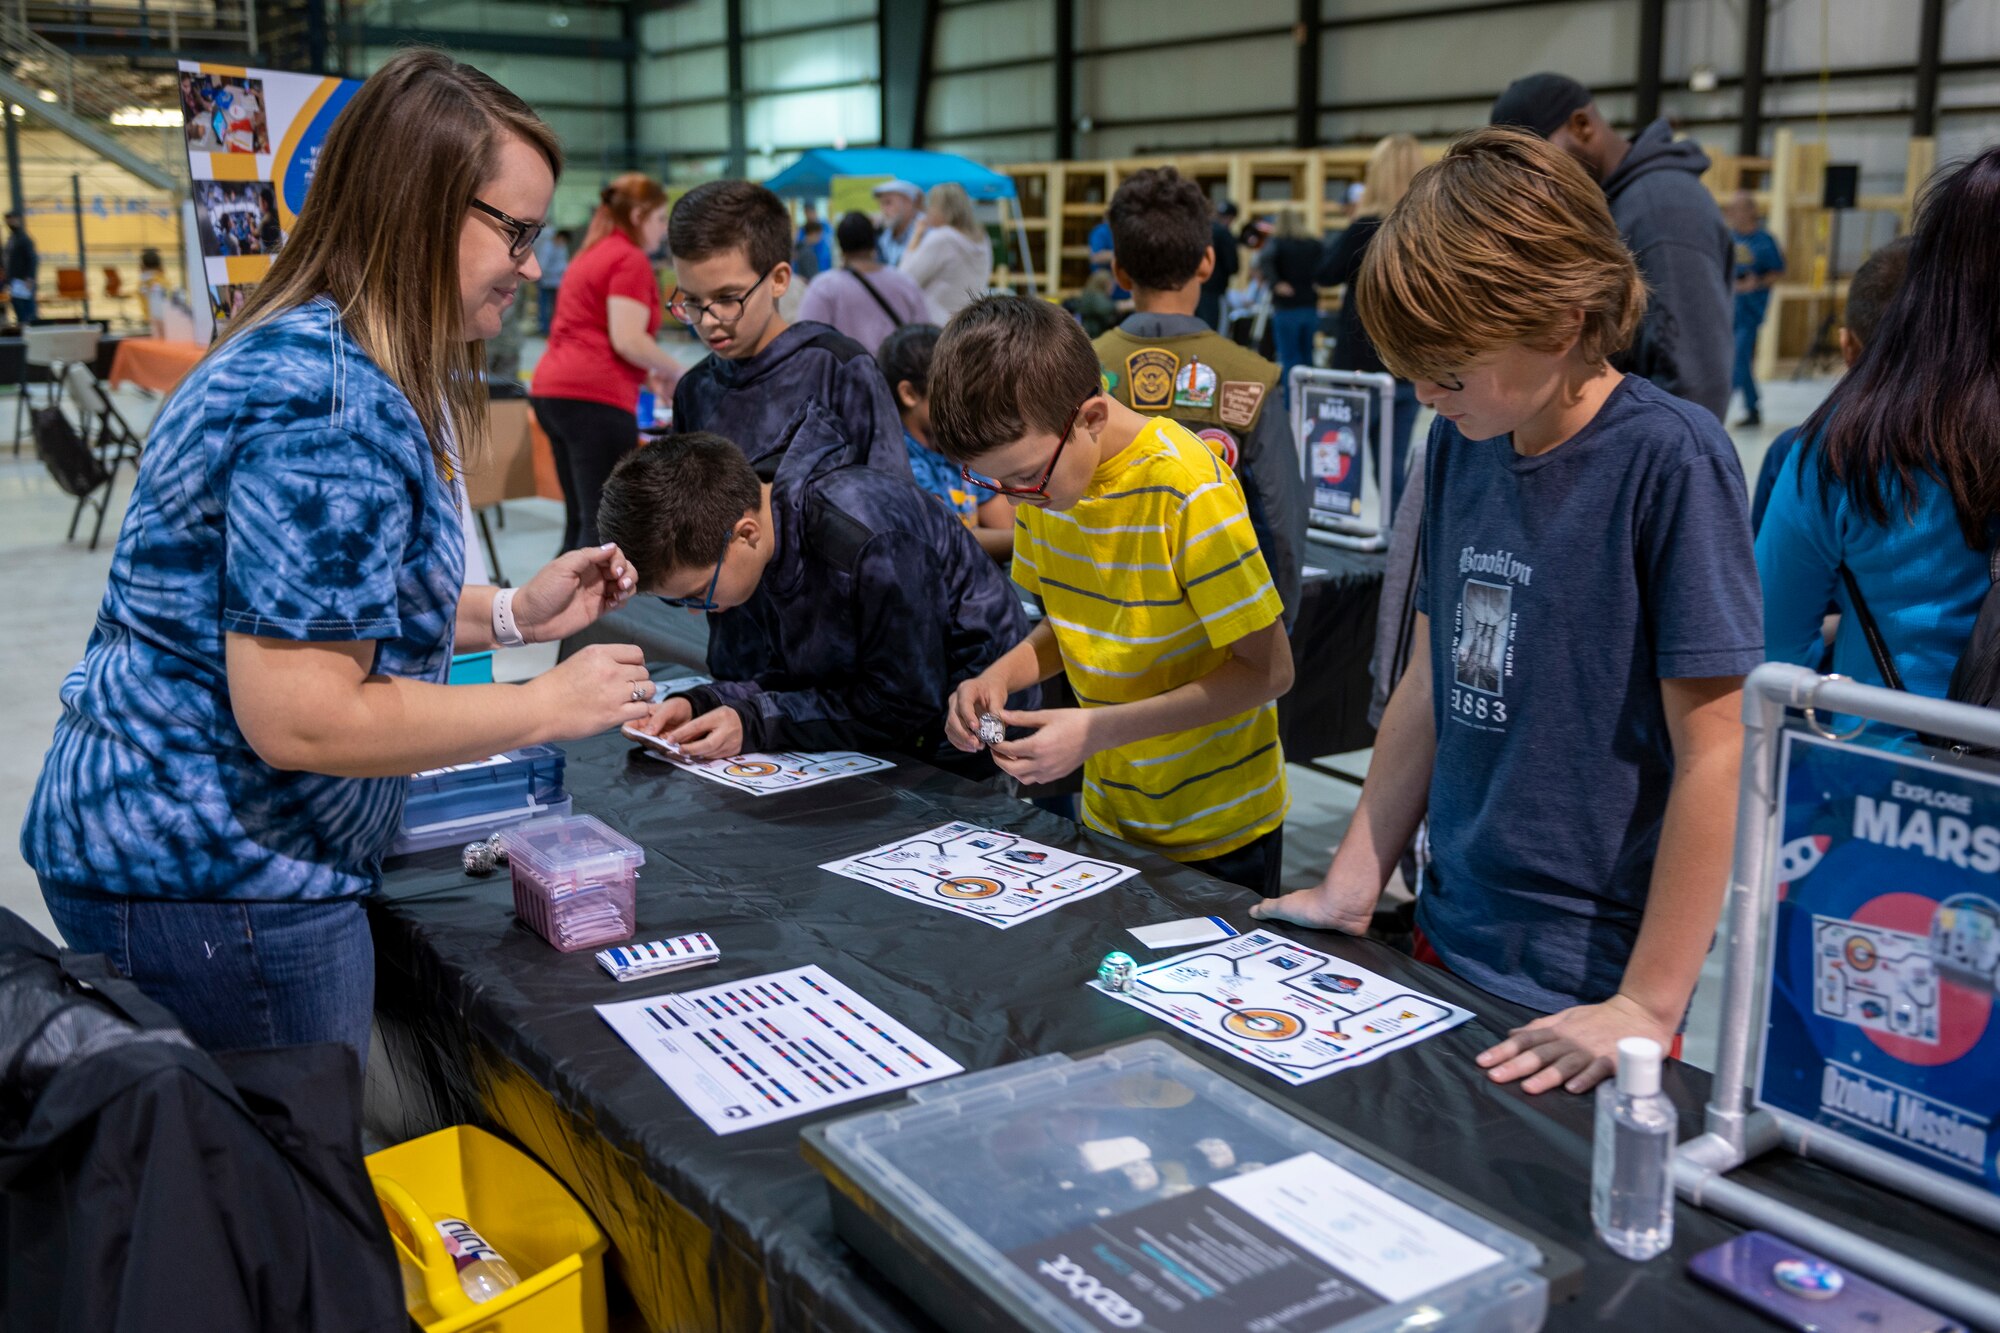 STARBASE Martinsburg instructor, Ashley Spies, assists youth with a STEM activity at the Family STEM Night at the former Sino Swearingen hangar at Eastern West Virginia Regional Airport, October 26, 2022. The event was co-hosted by STARBASE Martinsburg and the Air National Guard’s Drug Demand Reduction Program, in honor of Red Ribbon Week.